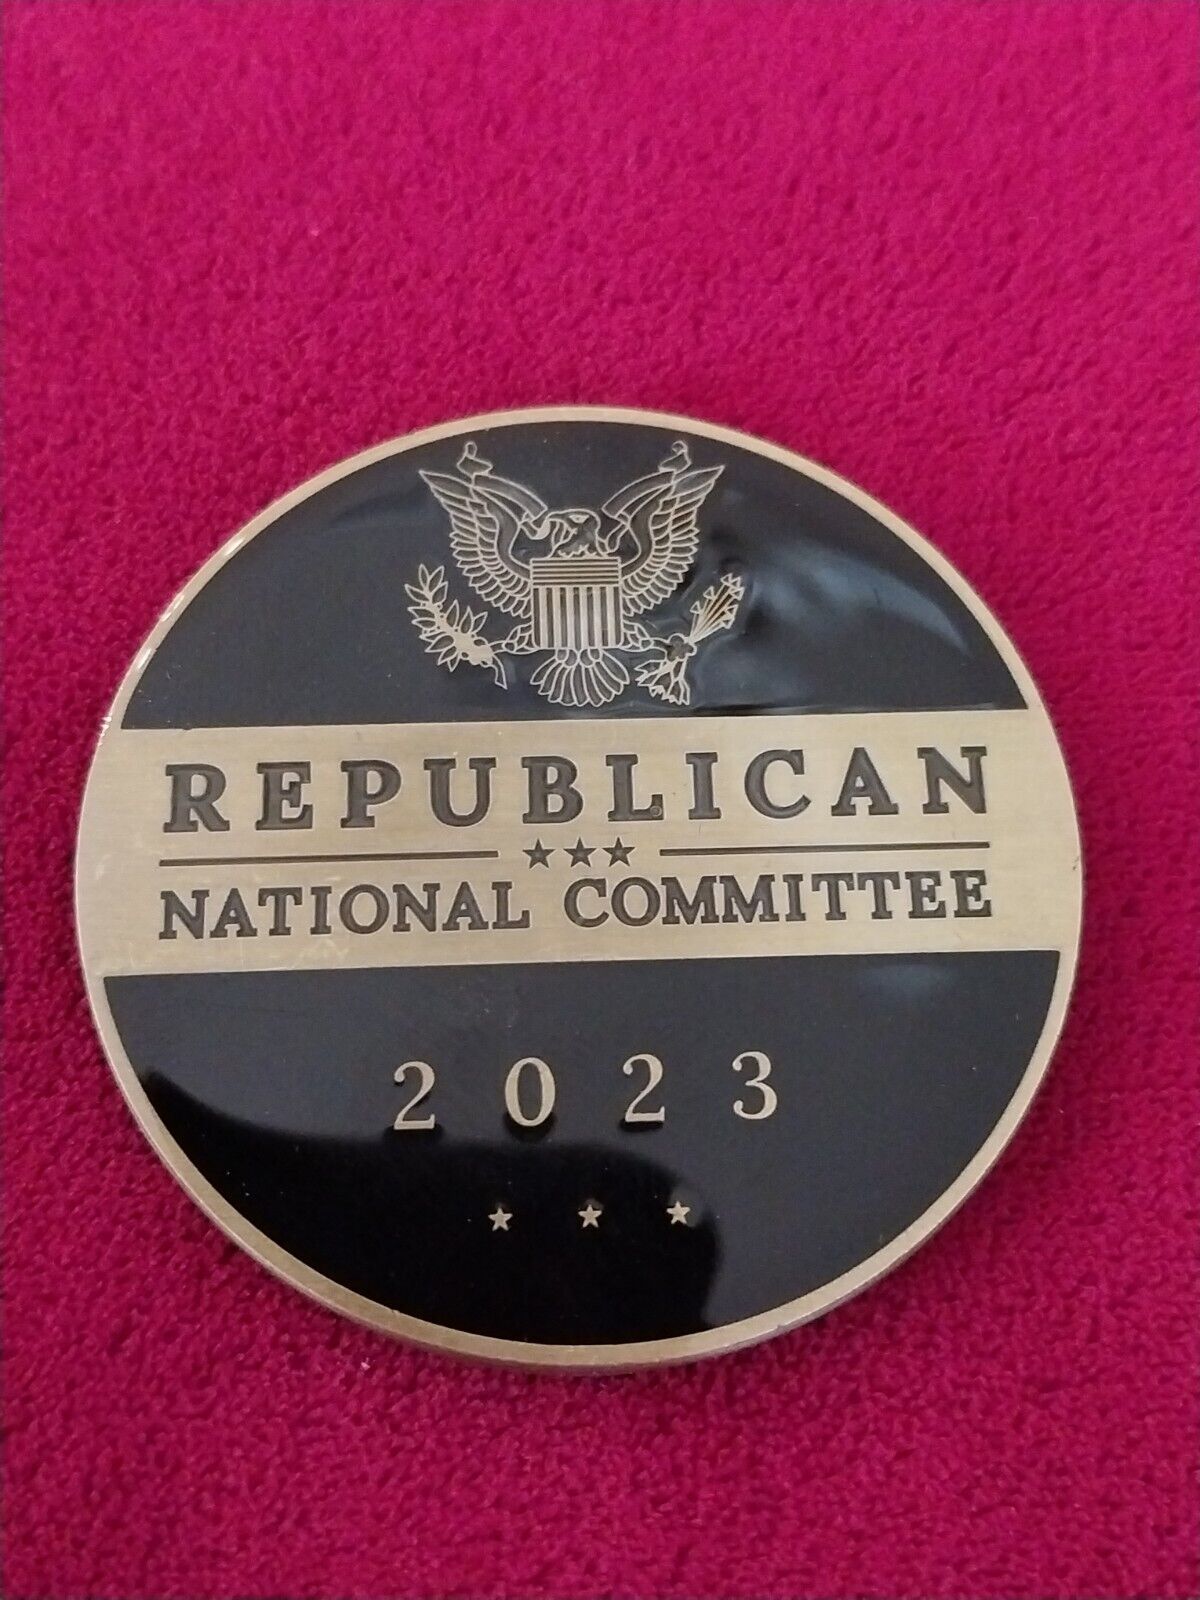 2023 RNC REPUBLICAN NATIONAL COMMITTEE LIFE MEMBER COIN Medal Ronna McDaniel